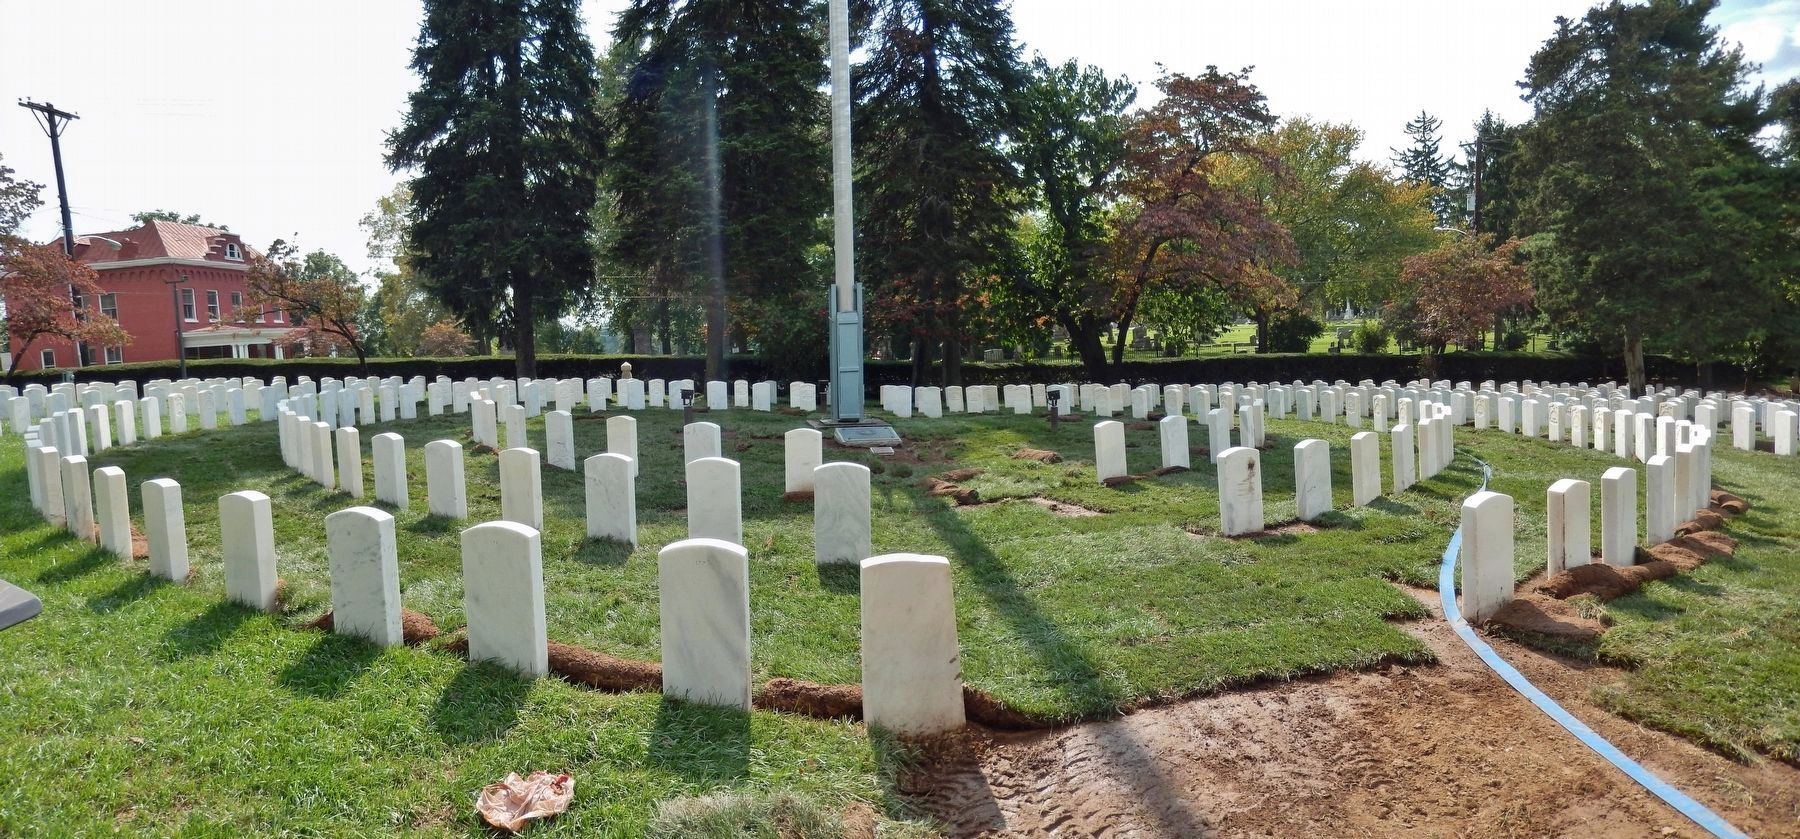 Lexington Cemetery Veterans Circle (<i>view from near marker; grounds under renovation</i>) image. Click for full size.